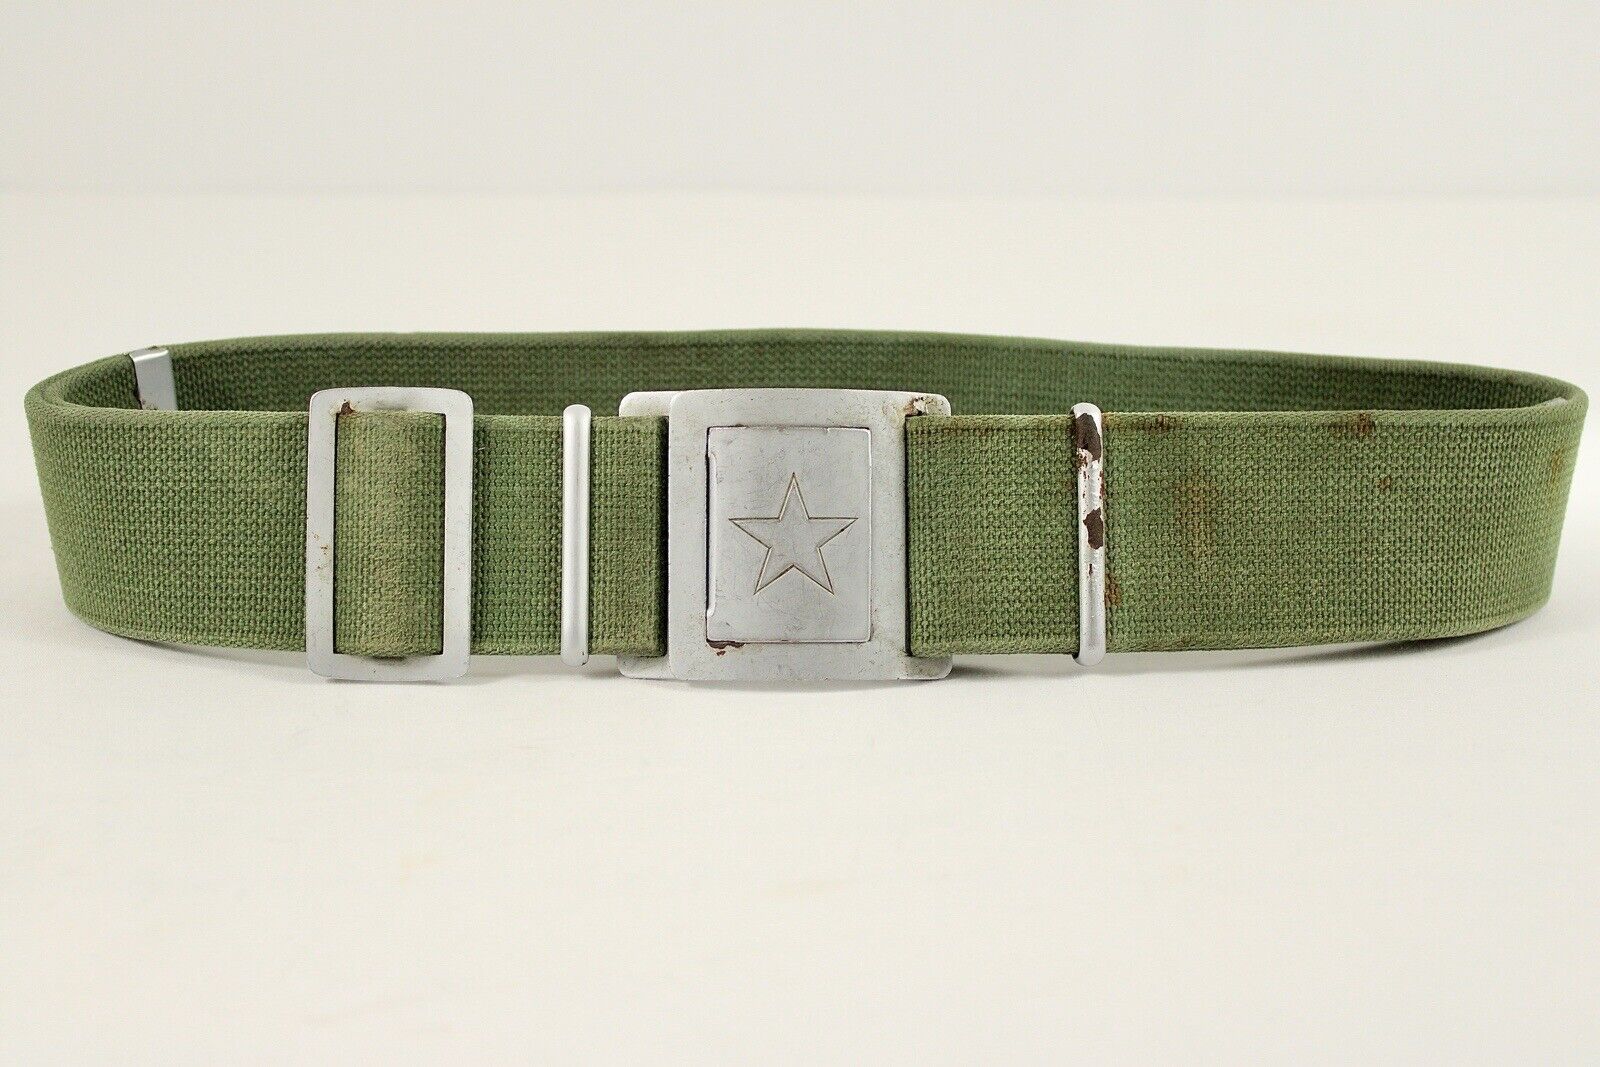 North Vietnamese Army / Viet Cong Reed-green Equipment Belt With Star Buckle.